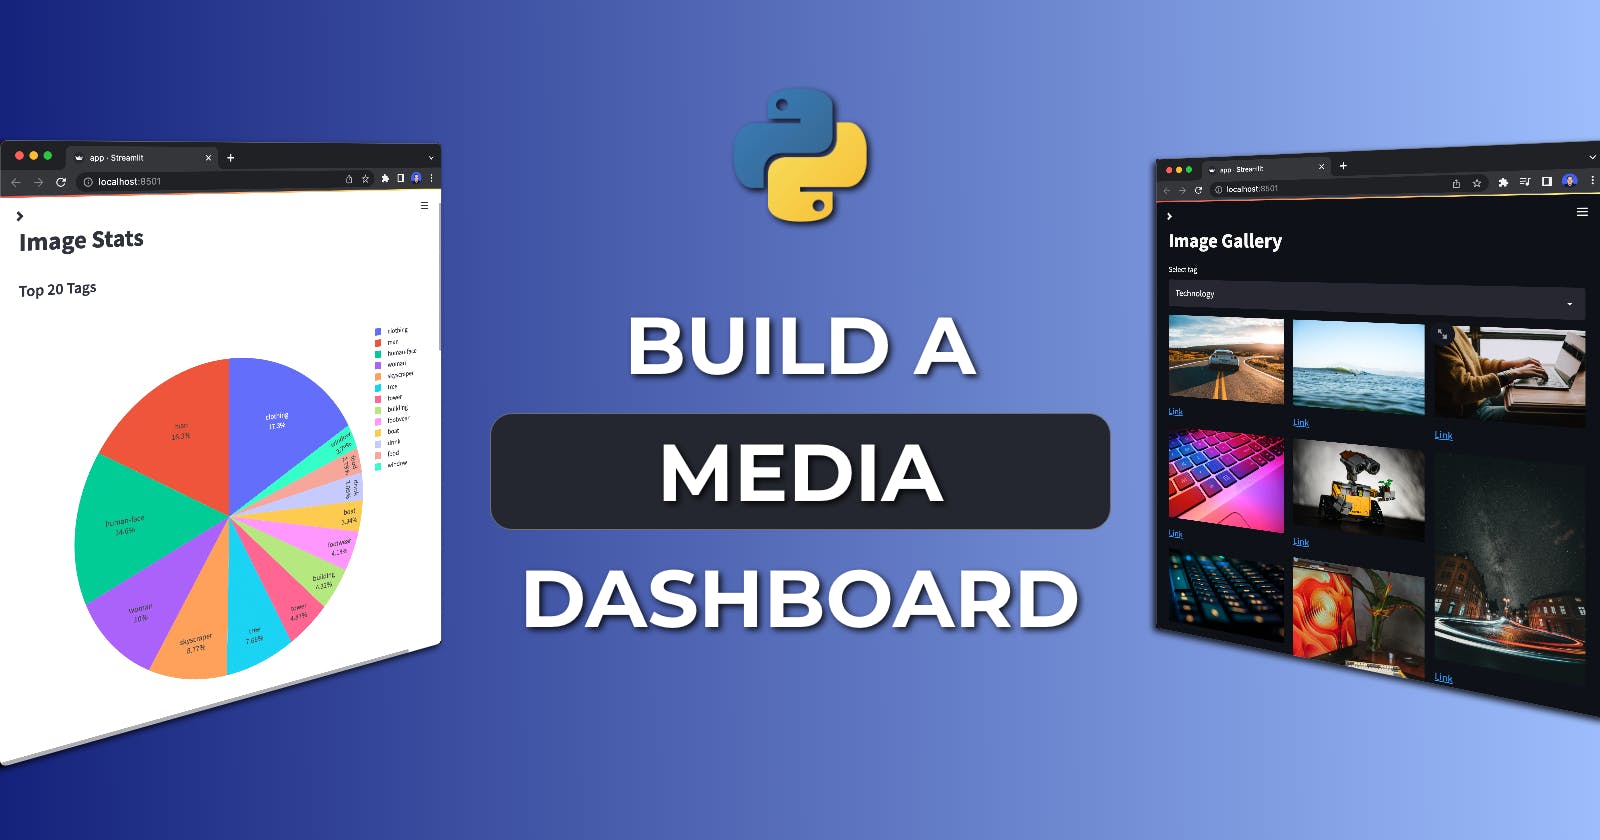 Build a Media Analysis Dashboard with Python & Cloudinary